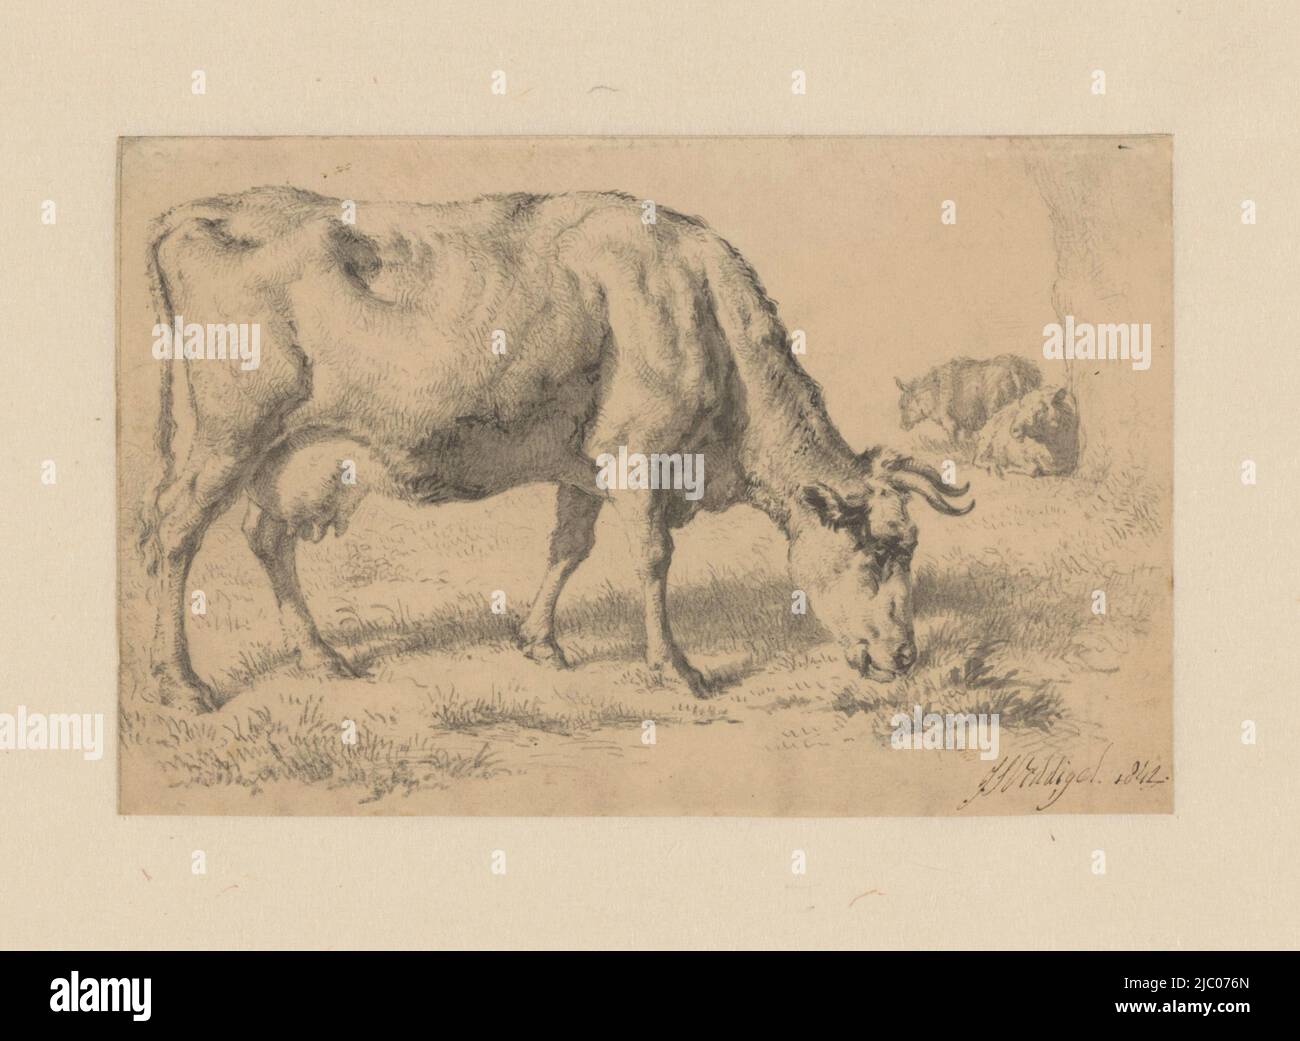 A grazing cow in a meadow with two sheep in the background, Grazing cow in a meadow, draughtsman: Jan Simon Voddigel, 1842, paper, brush, h 110 mm × w 171 mm Stock Photo